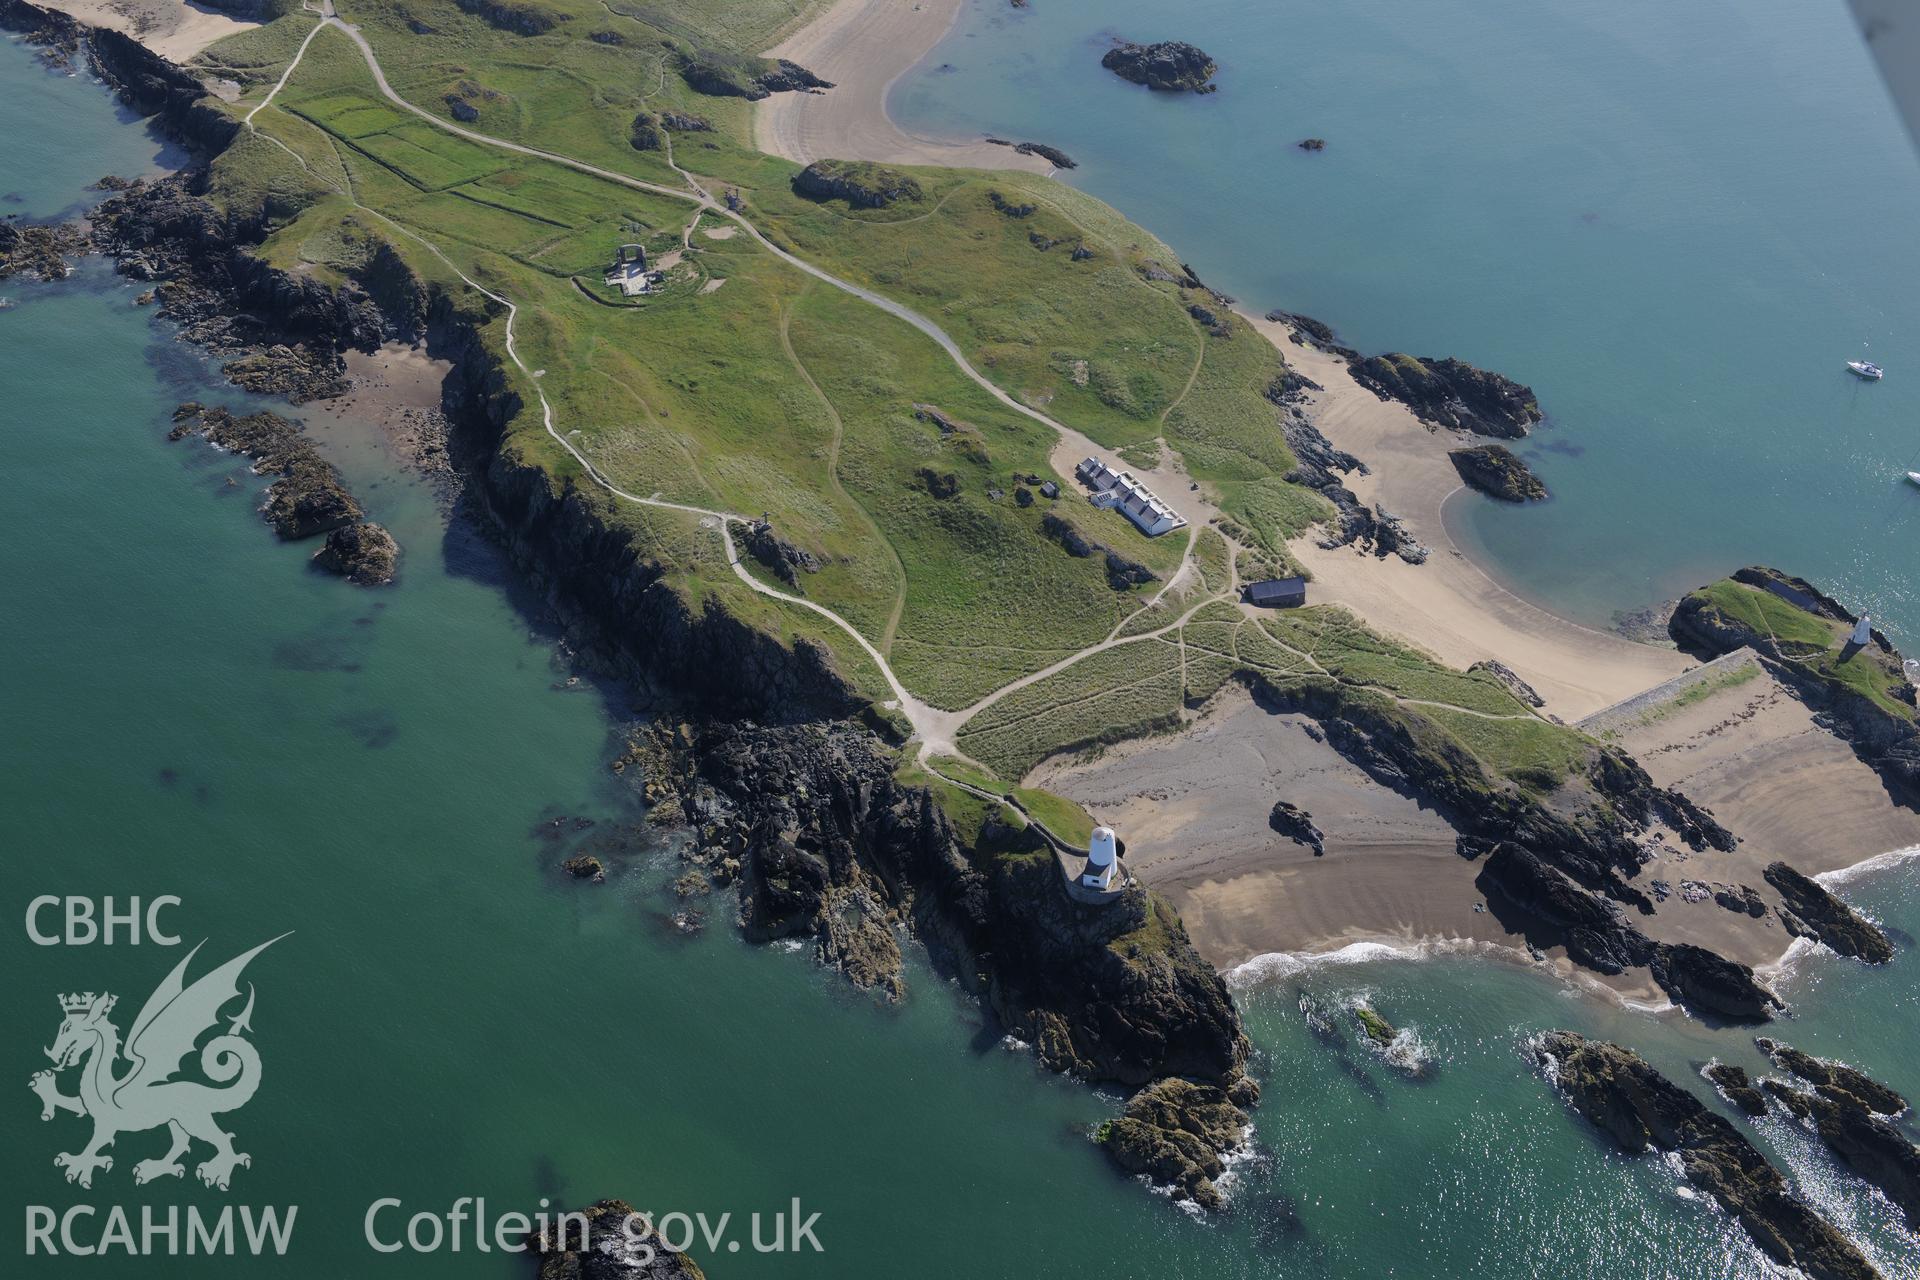 The lighthouse, tower, pilot's house and St. Dwynwen's Church on Llanddwyn Island. Oblique aerial photograph taken during the Royal Commission's programme of archaeological aerial reconnaissance by Toby Driver on 23rd June 2015.